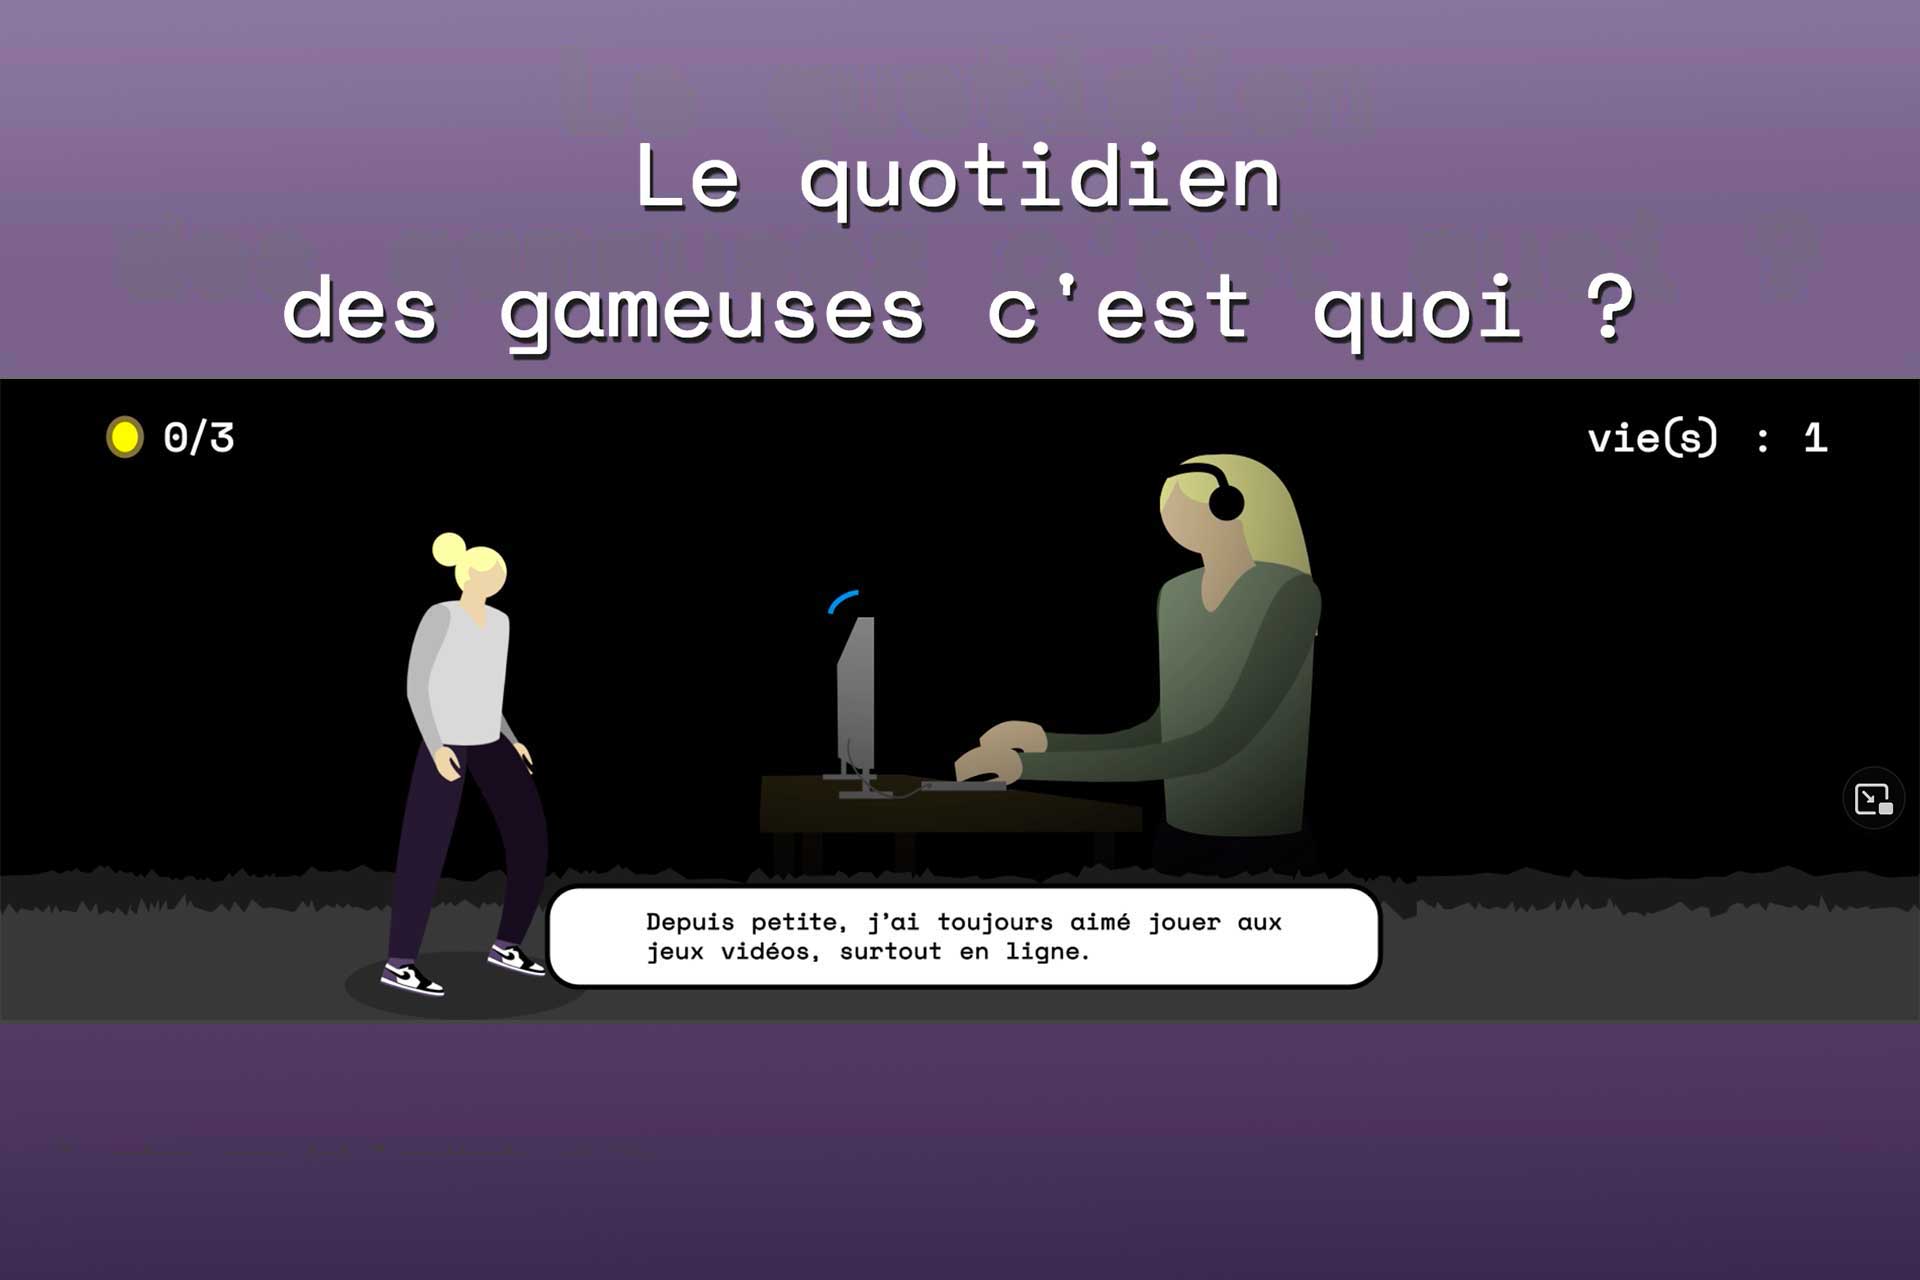 Les gameuses